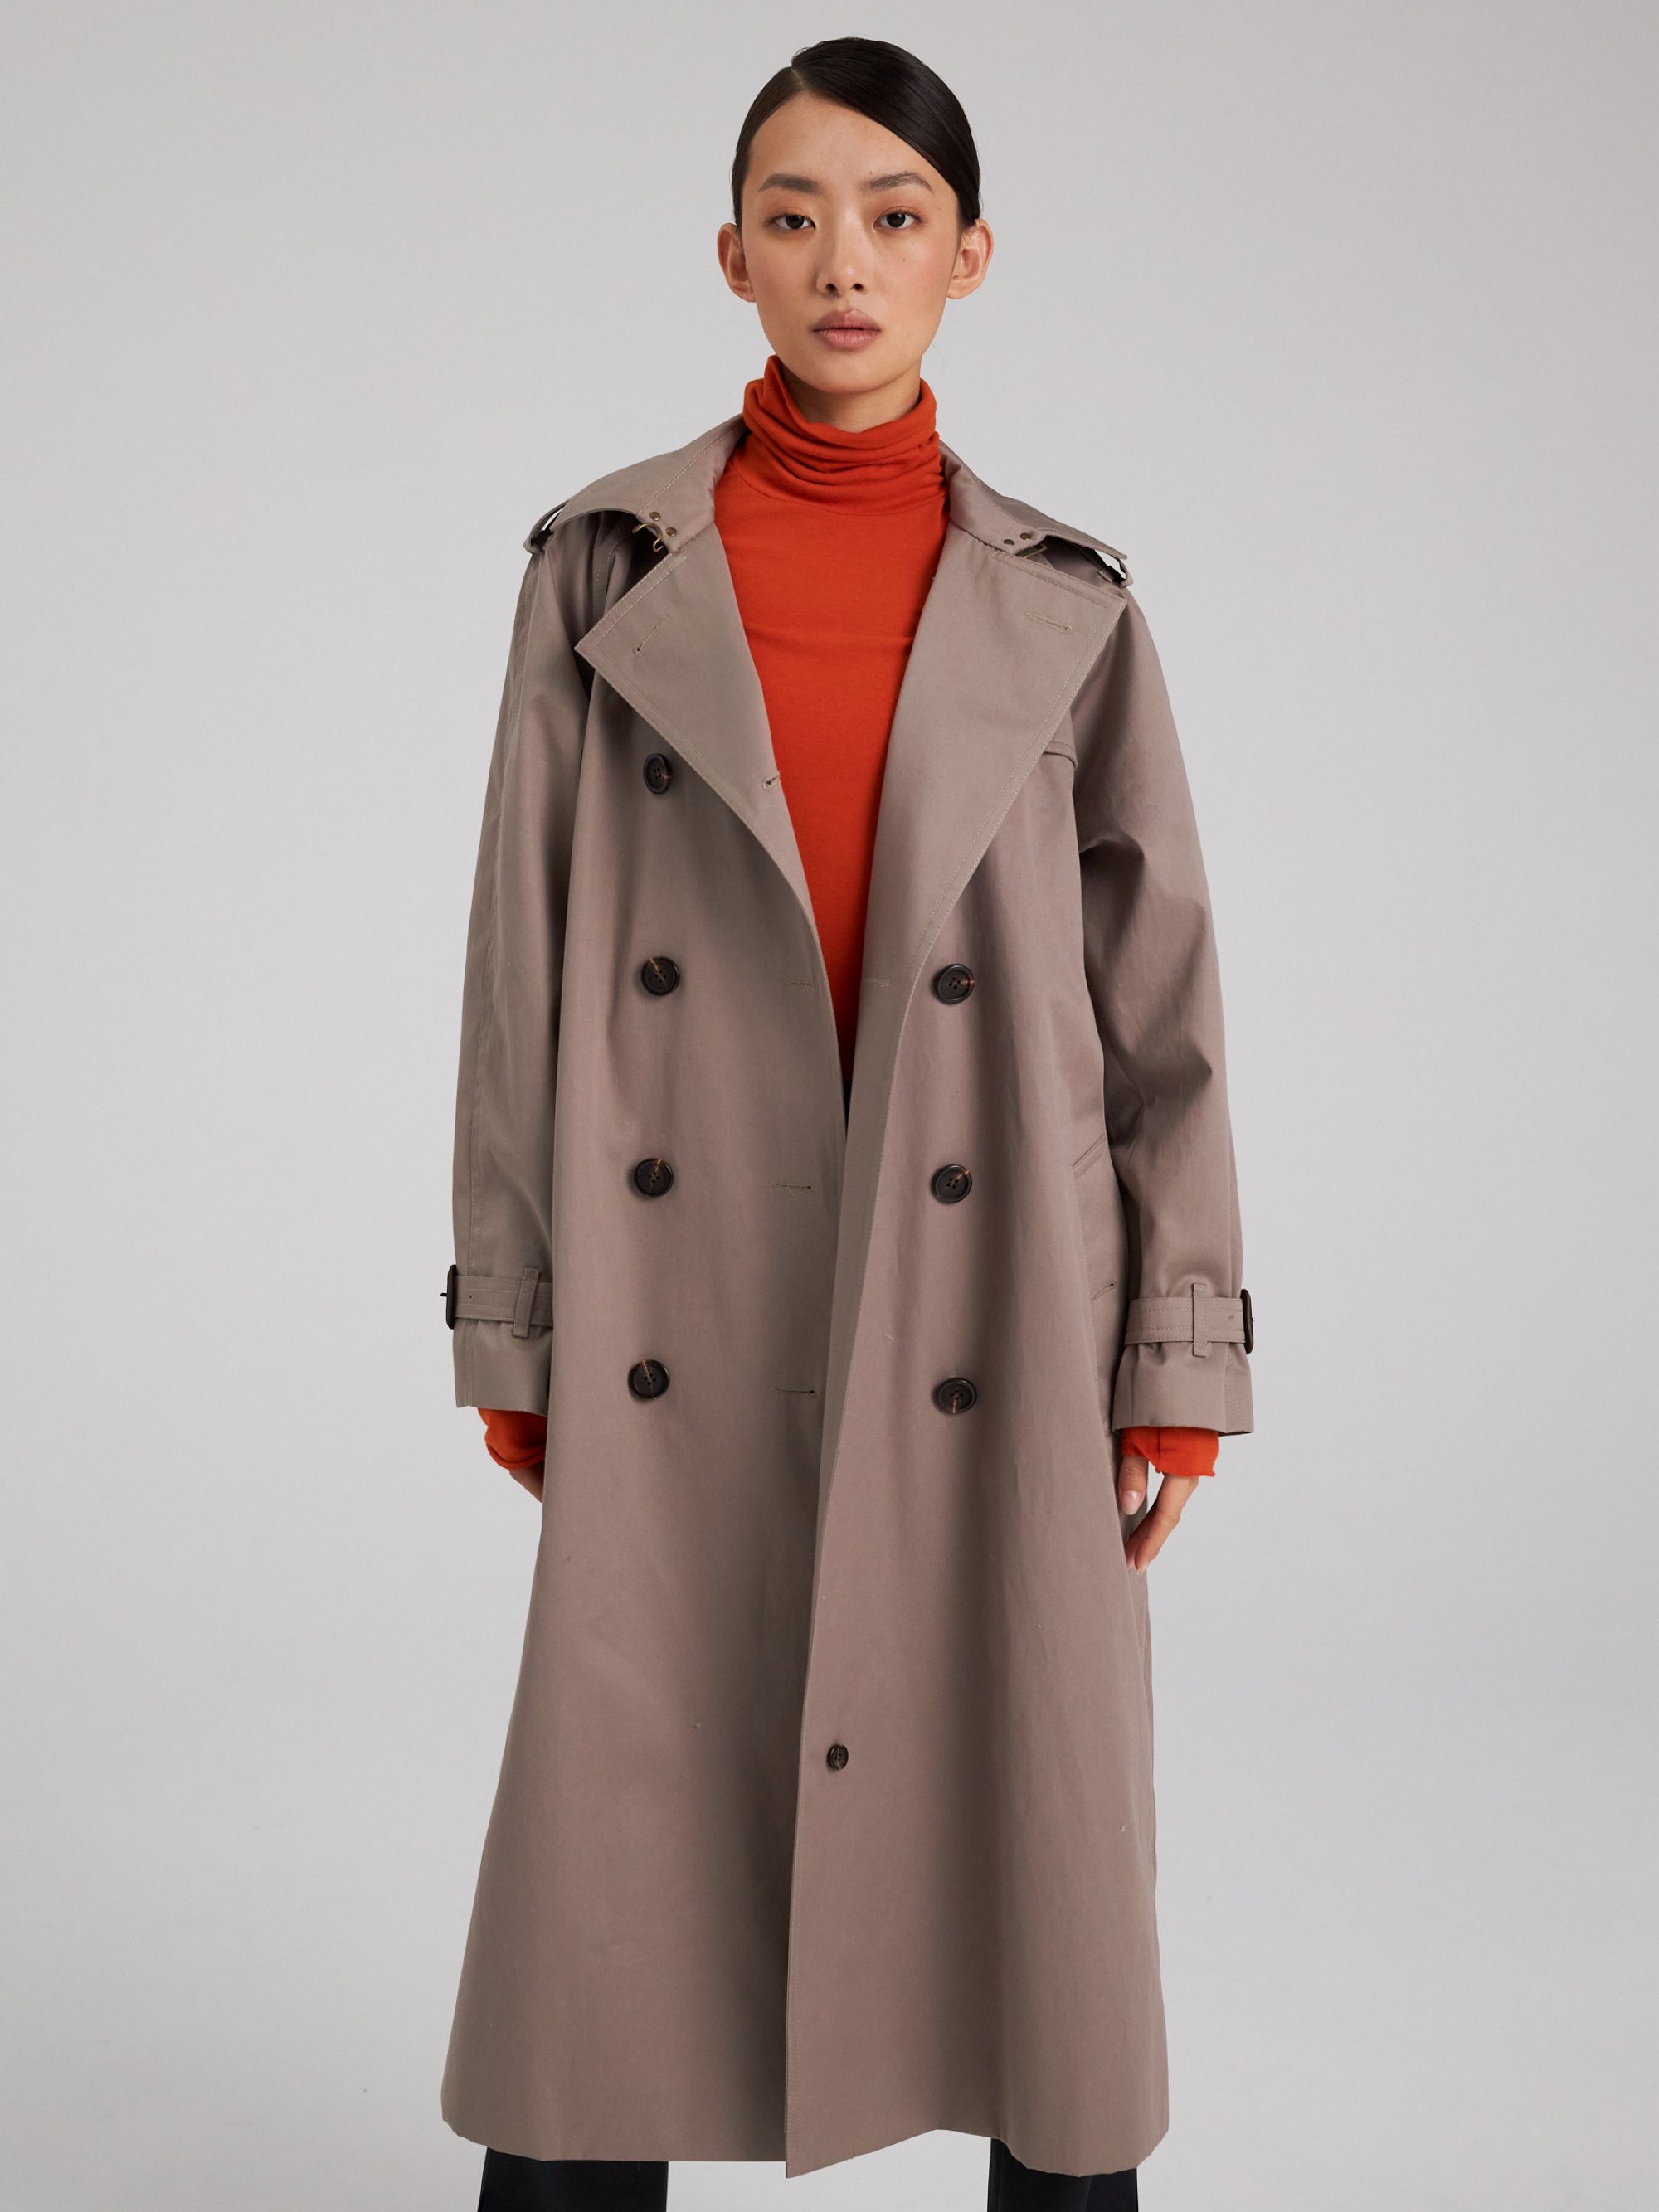 Trench coat, pattern №1003 buy on-line